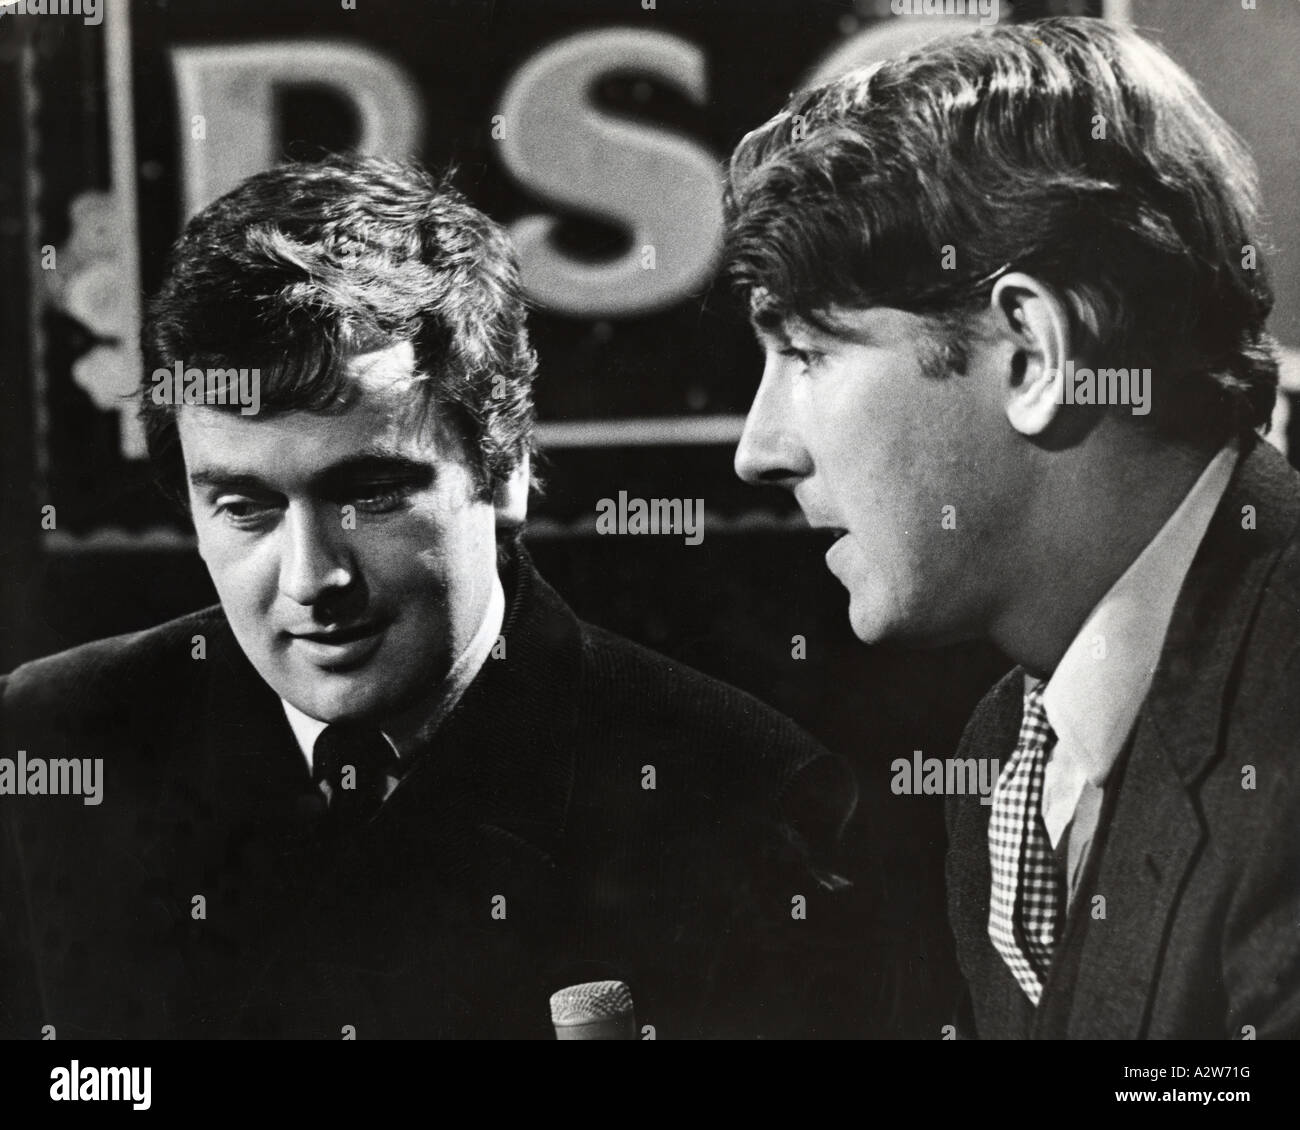 PETER COOK at right and Dudley Moore UK comedians on a TV show about 1958 Stock Photo